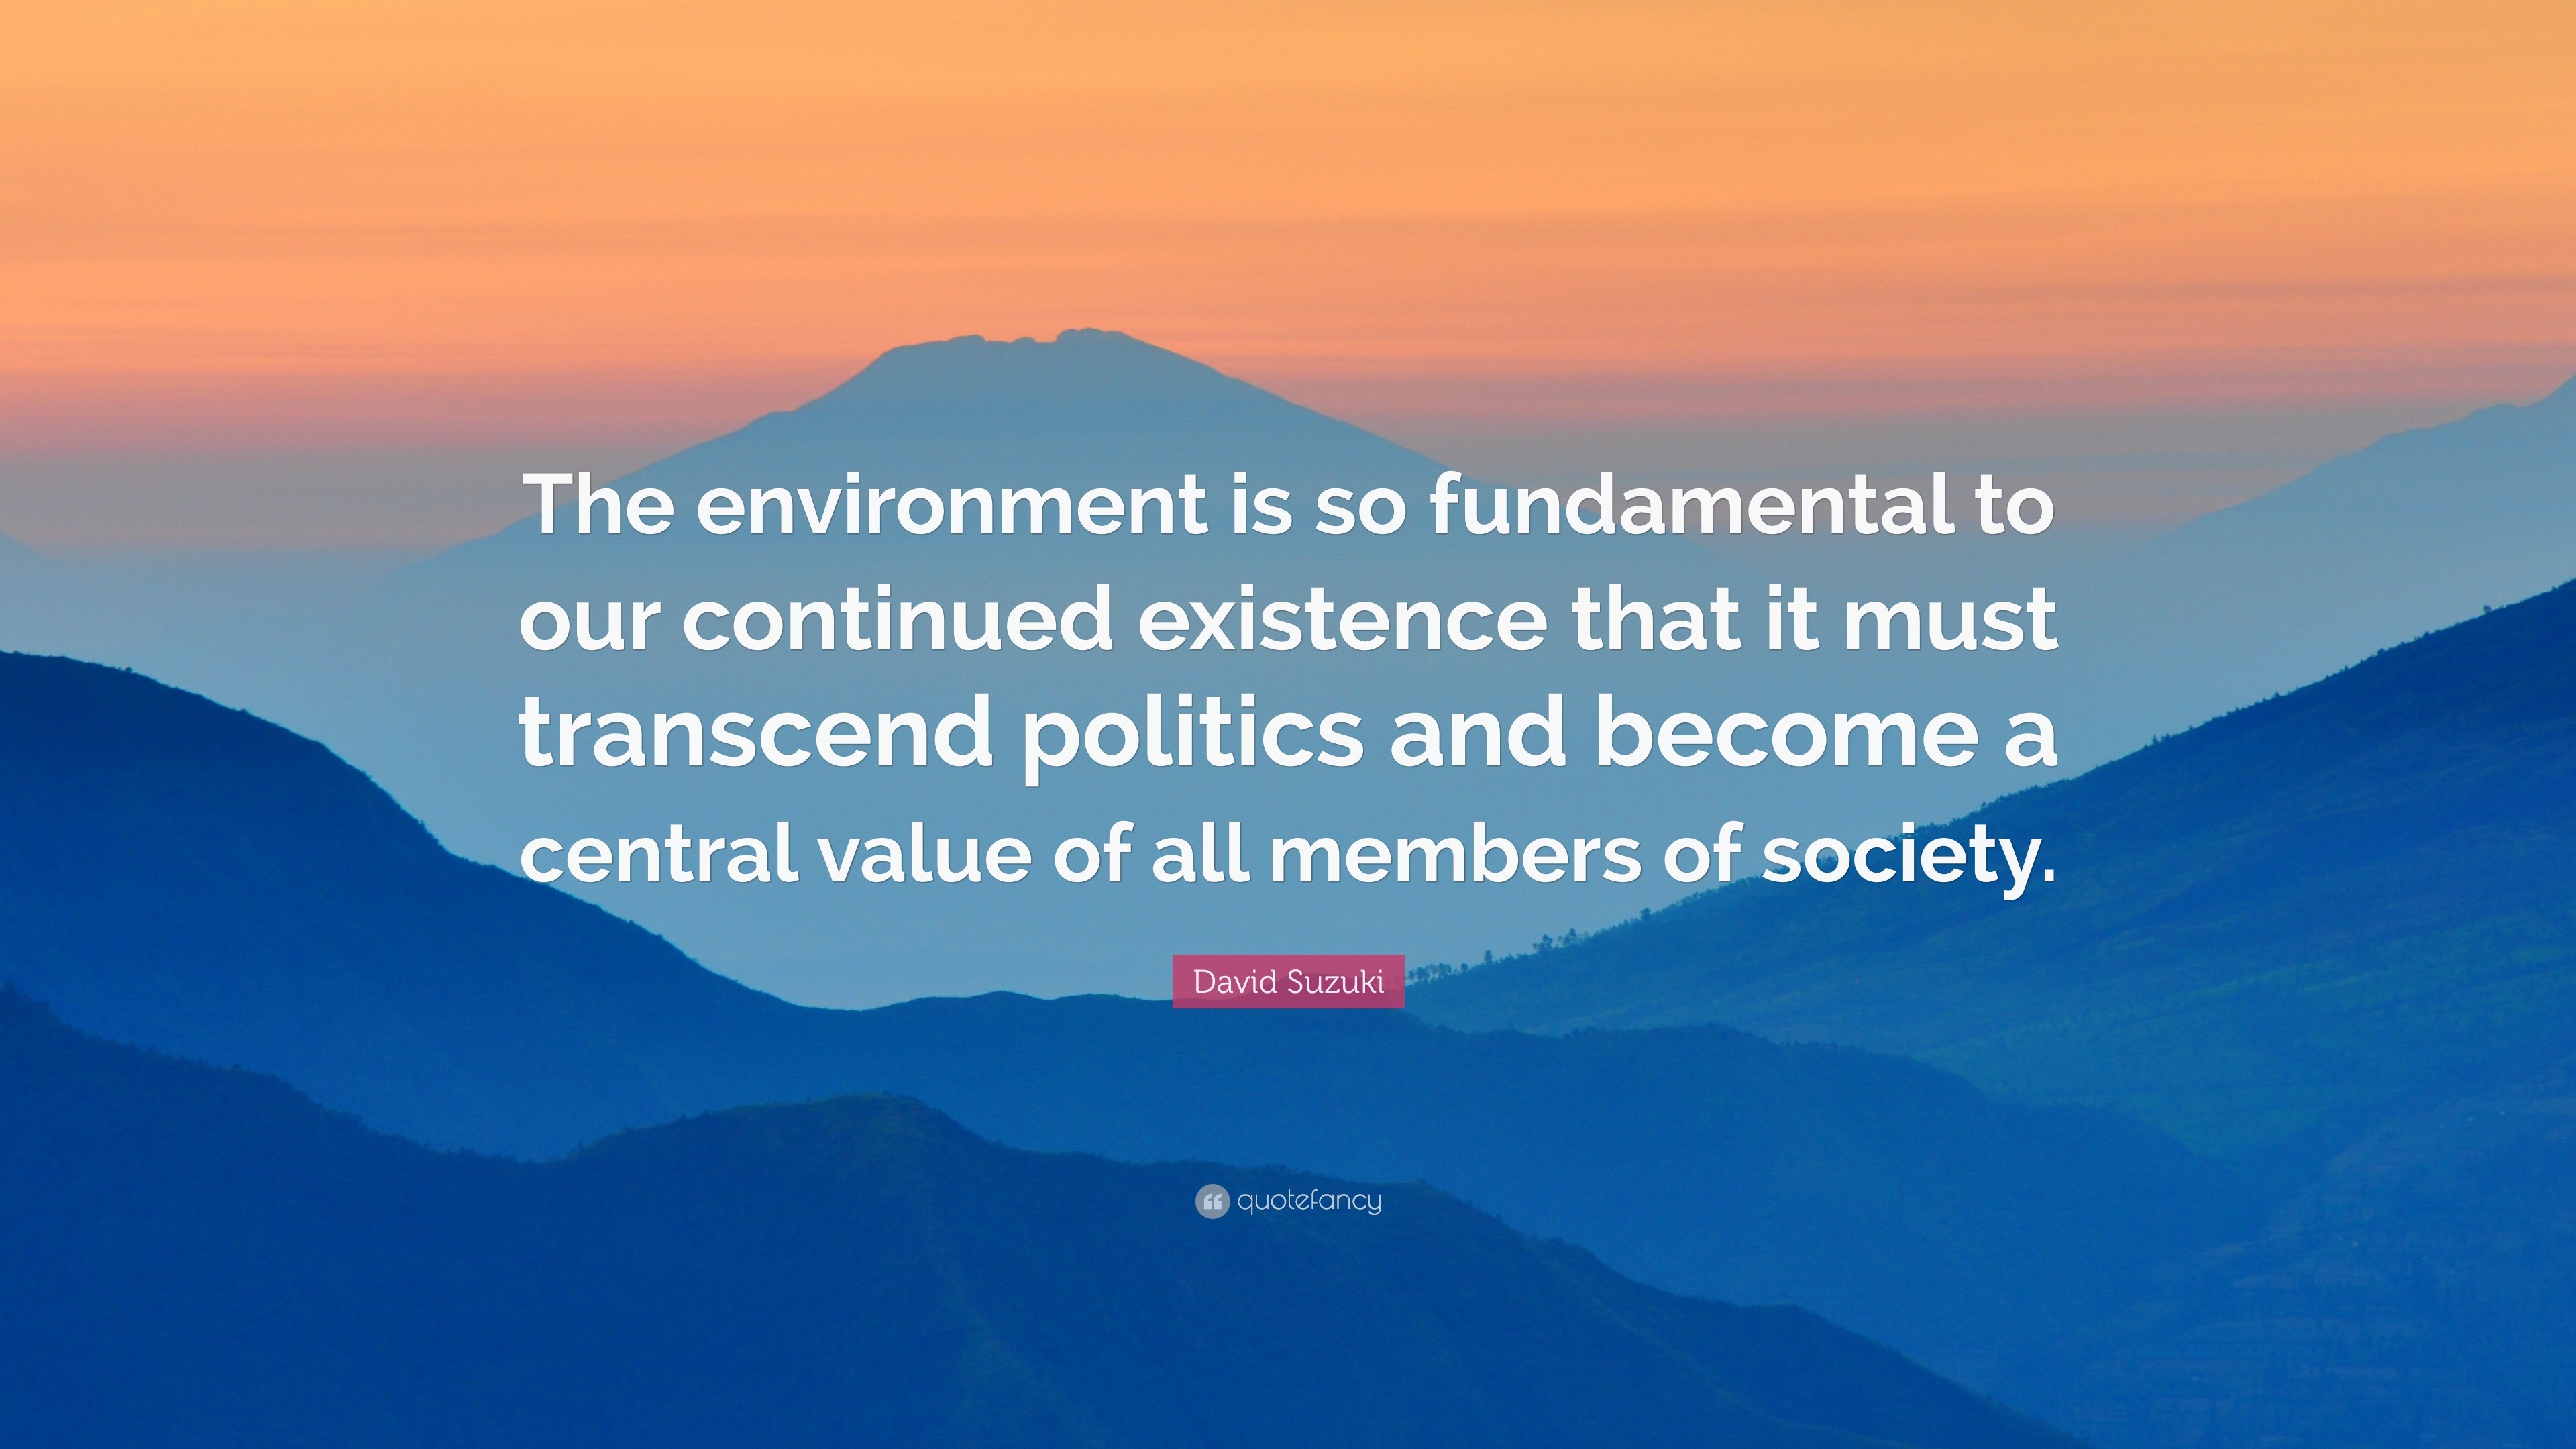 David Suzuki Quote: “The environment is so fundamental to our continued